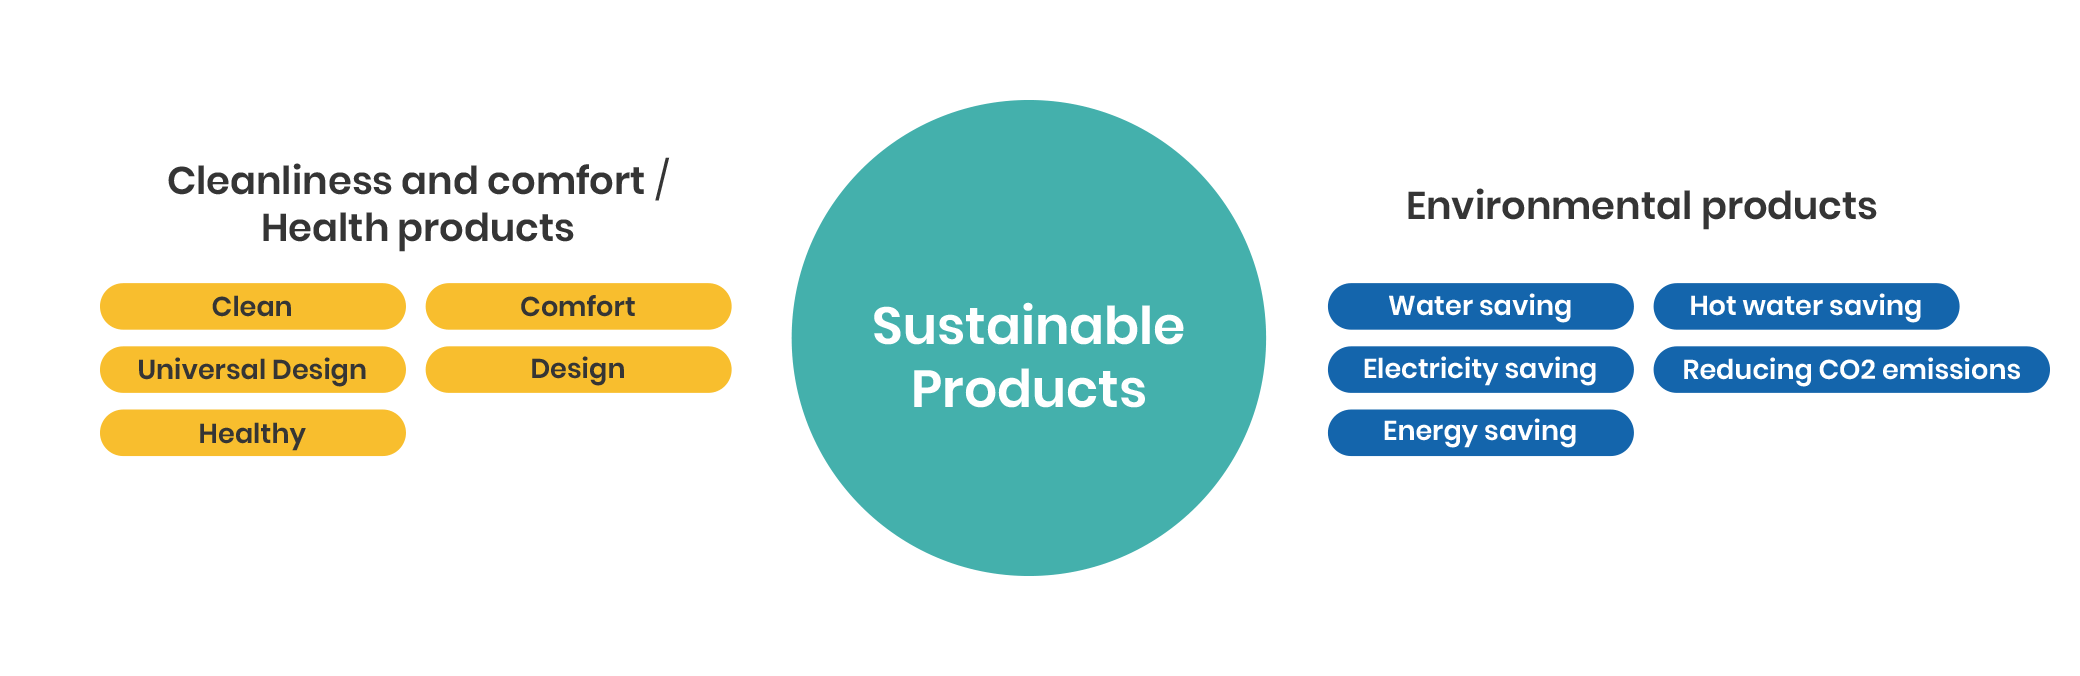 Sustainable Products. Cleanliness and comfort / Health products: Clean, Comfort, Universal Design, Design, Healthy. Environmental products: Water saving, Hot water saving, Electricity saving, Reducing C02 emissions, Energy saving.